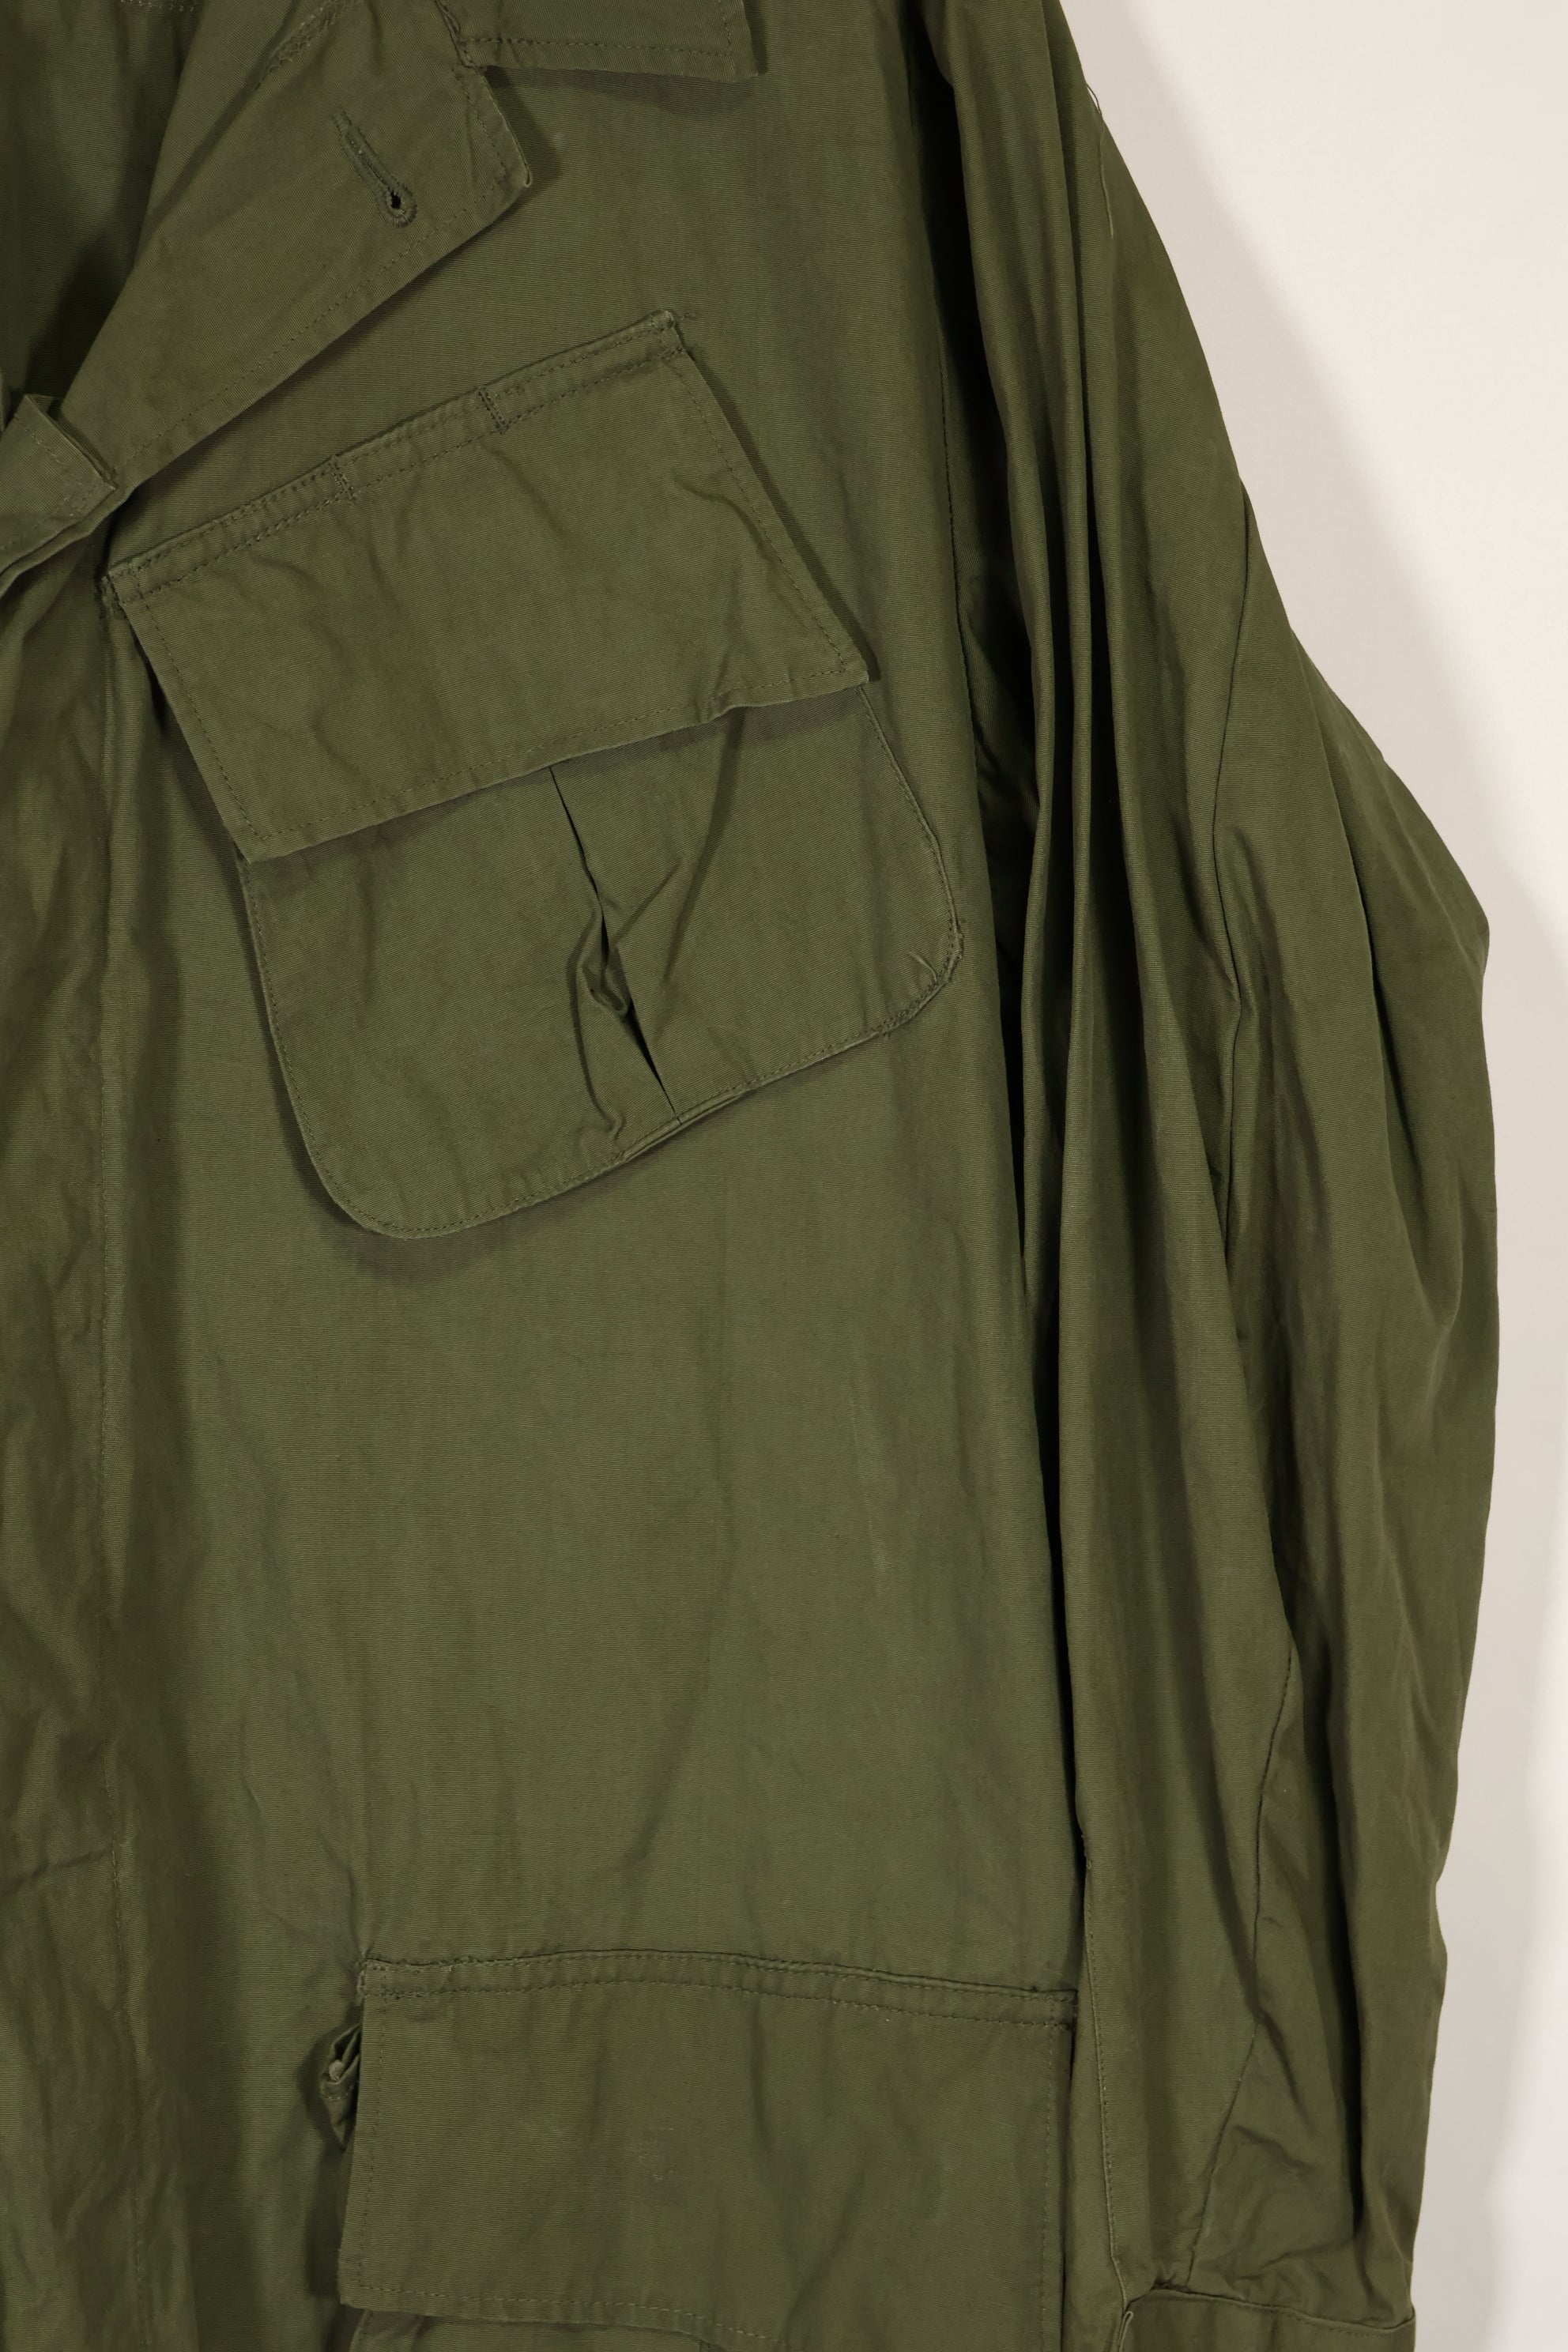 Real 1966-1967 3rd Model Jungle Fatigue Jacket L-R with damage.